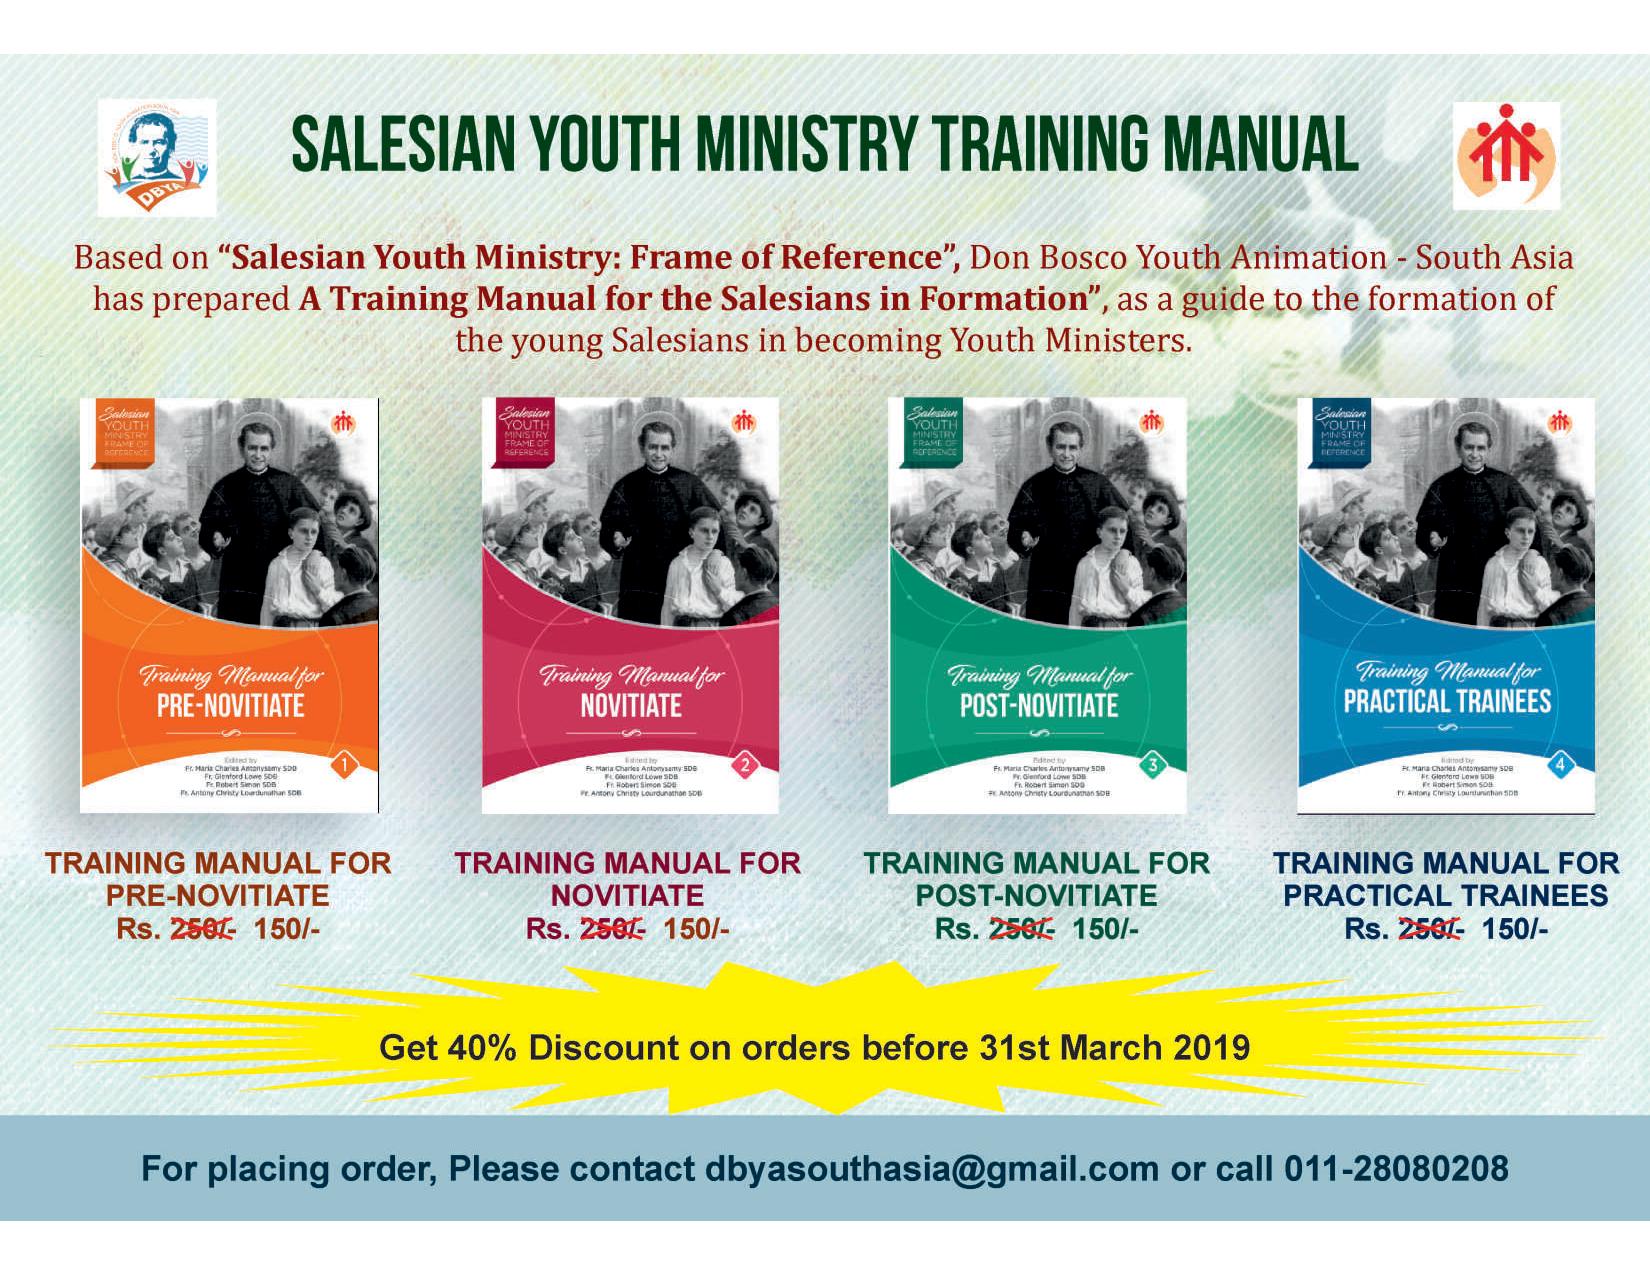 YM FoR training manual 2019-page-001.jpg